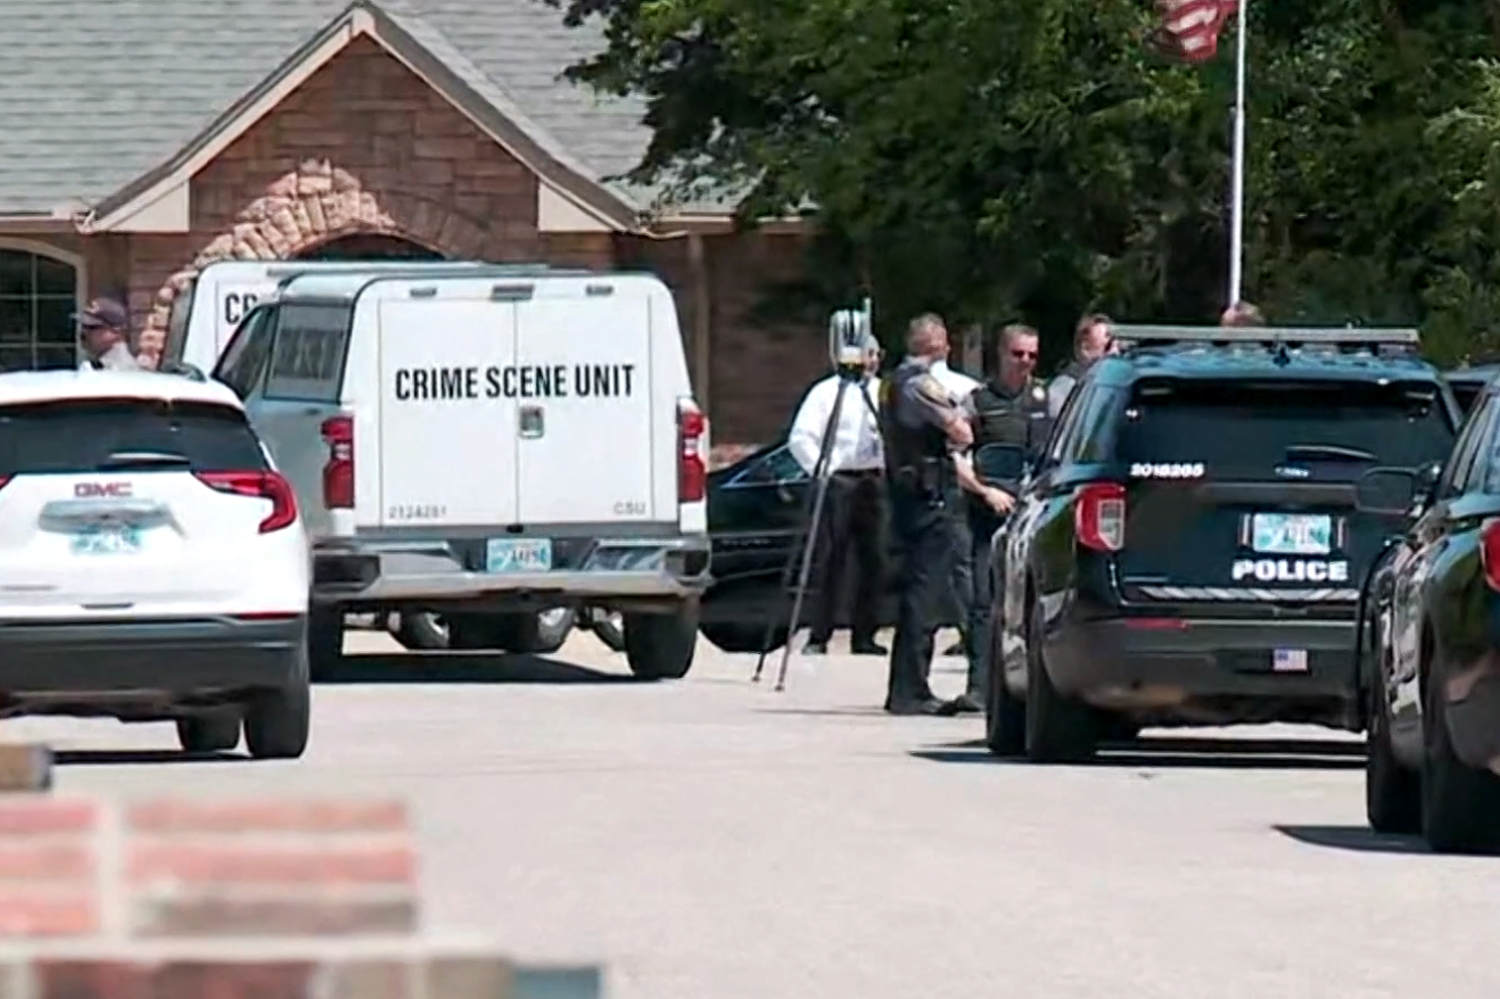 10-year-old wakes up to find his family killed in murder-suicide 'massacre'